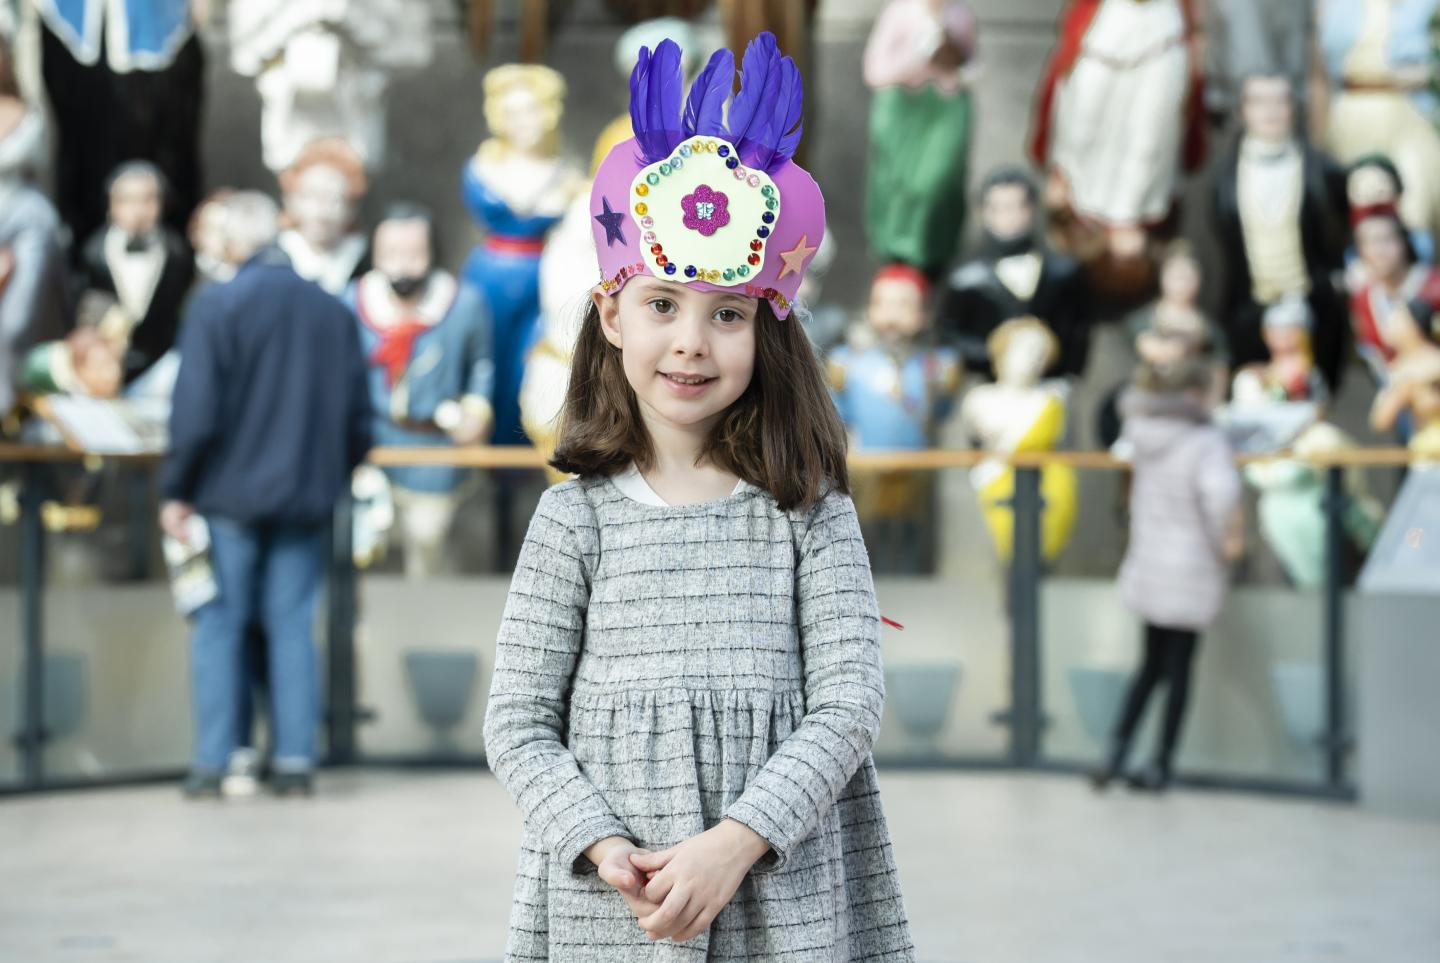 (source of a little girl wearing a paper crown with feathers picture)